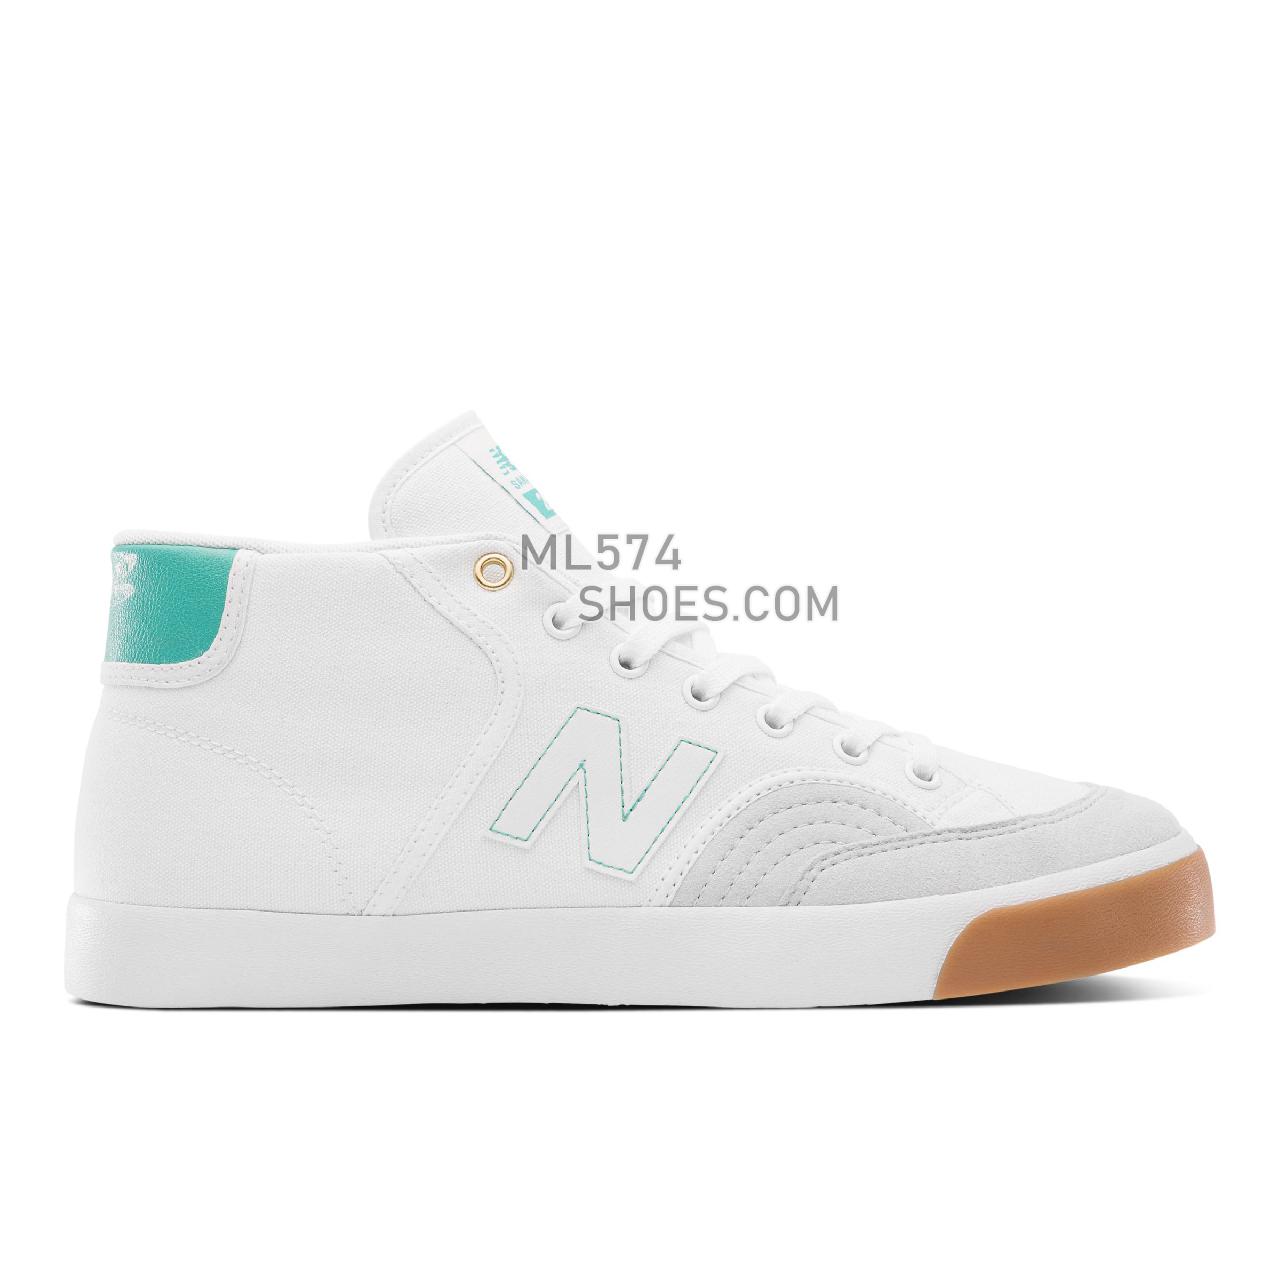 New Balance NM213 - Men's Classic Sneakers - White with Blue - NM213SAM